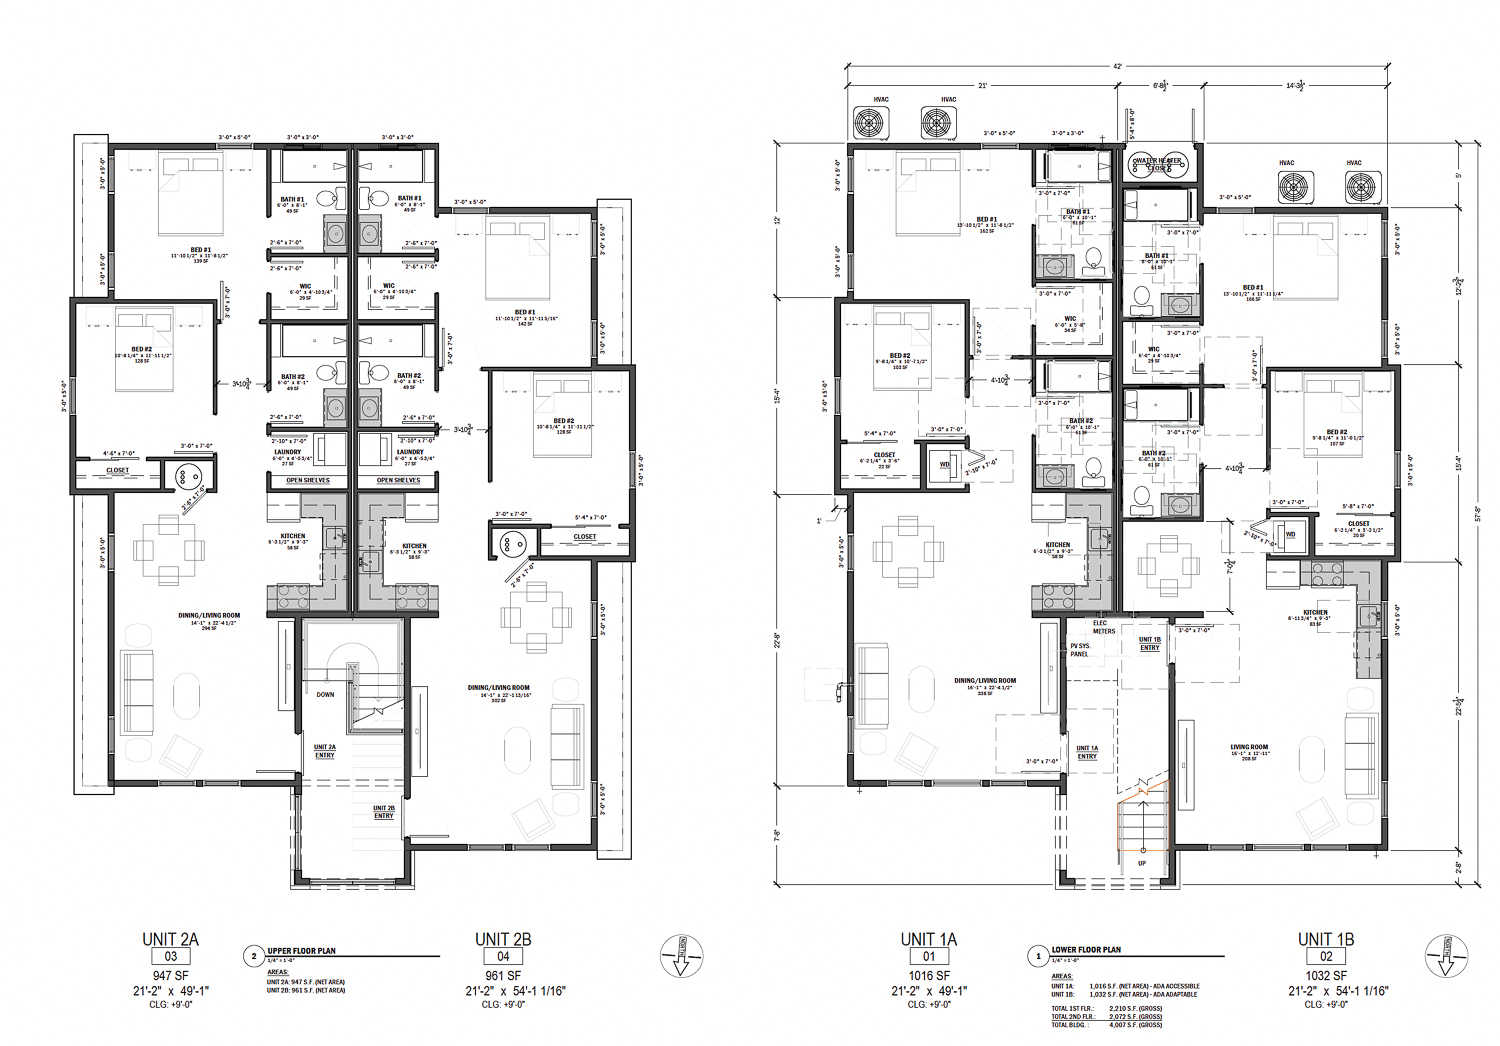 5372 Young Street floor plans, elevation by ADG Engineering